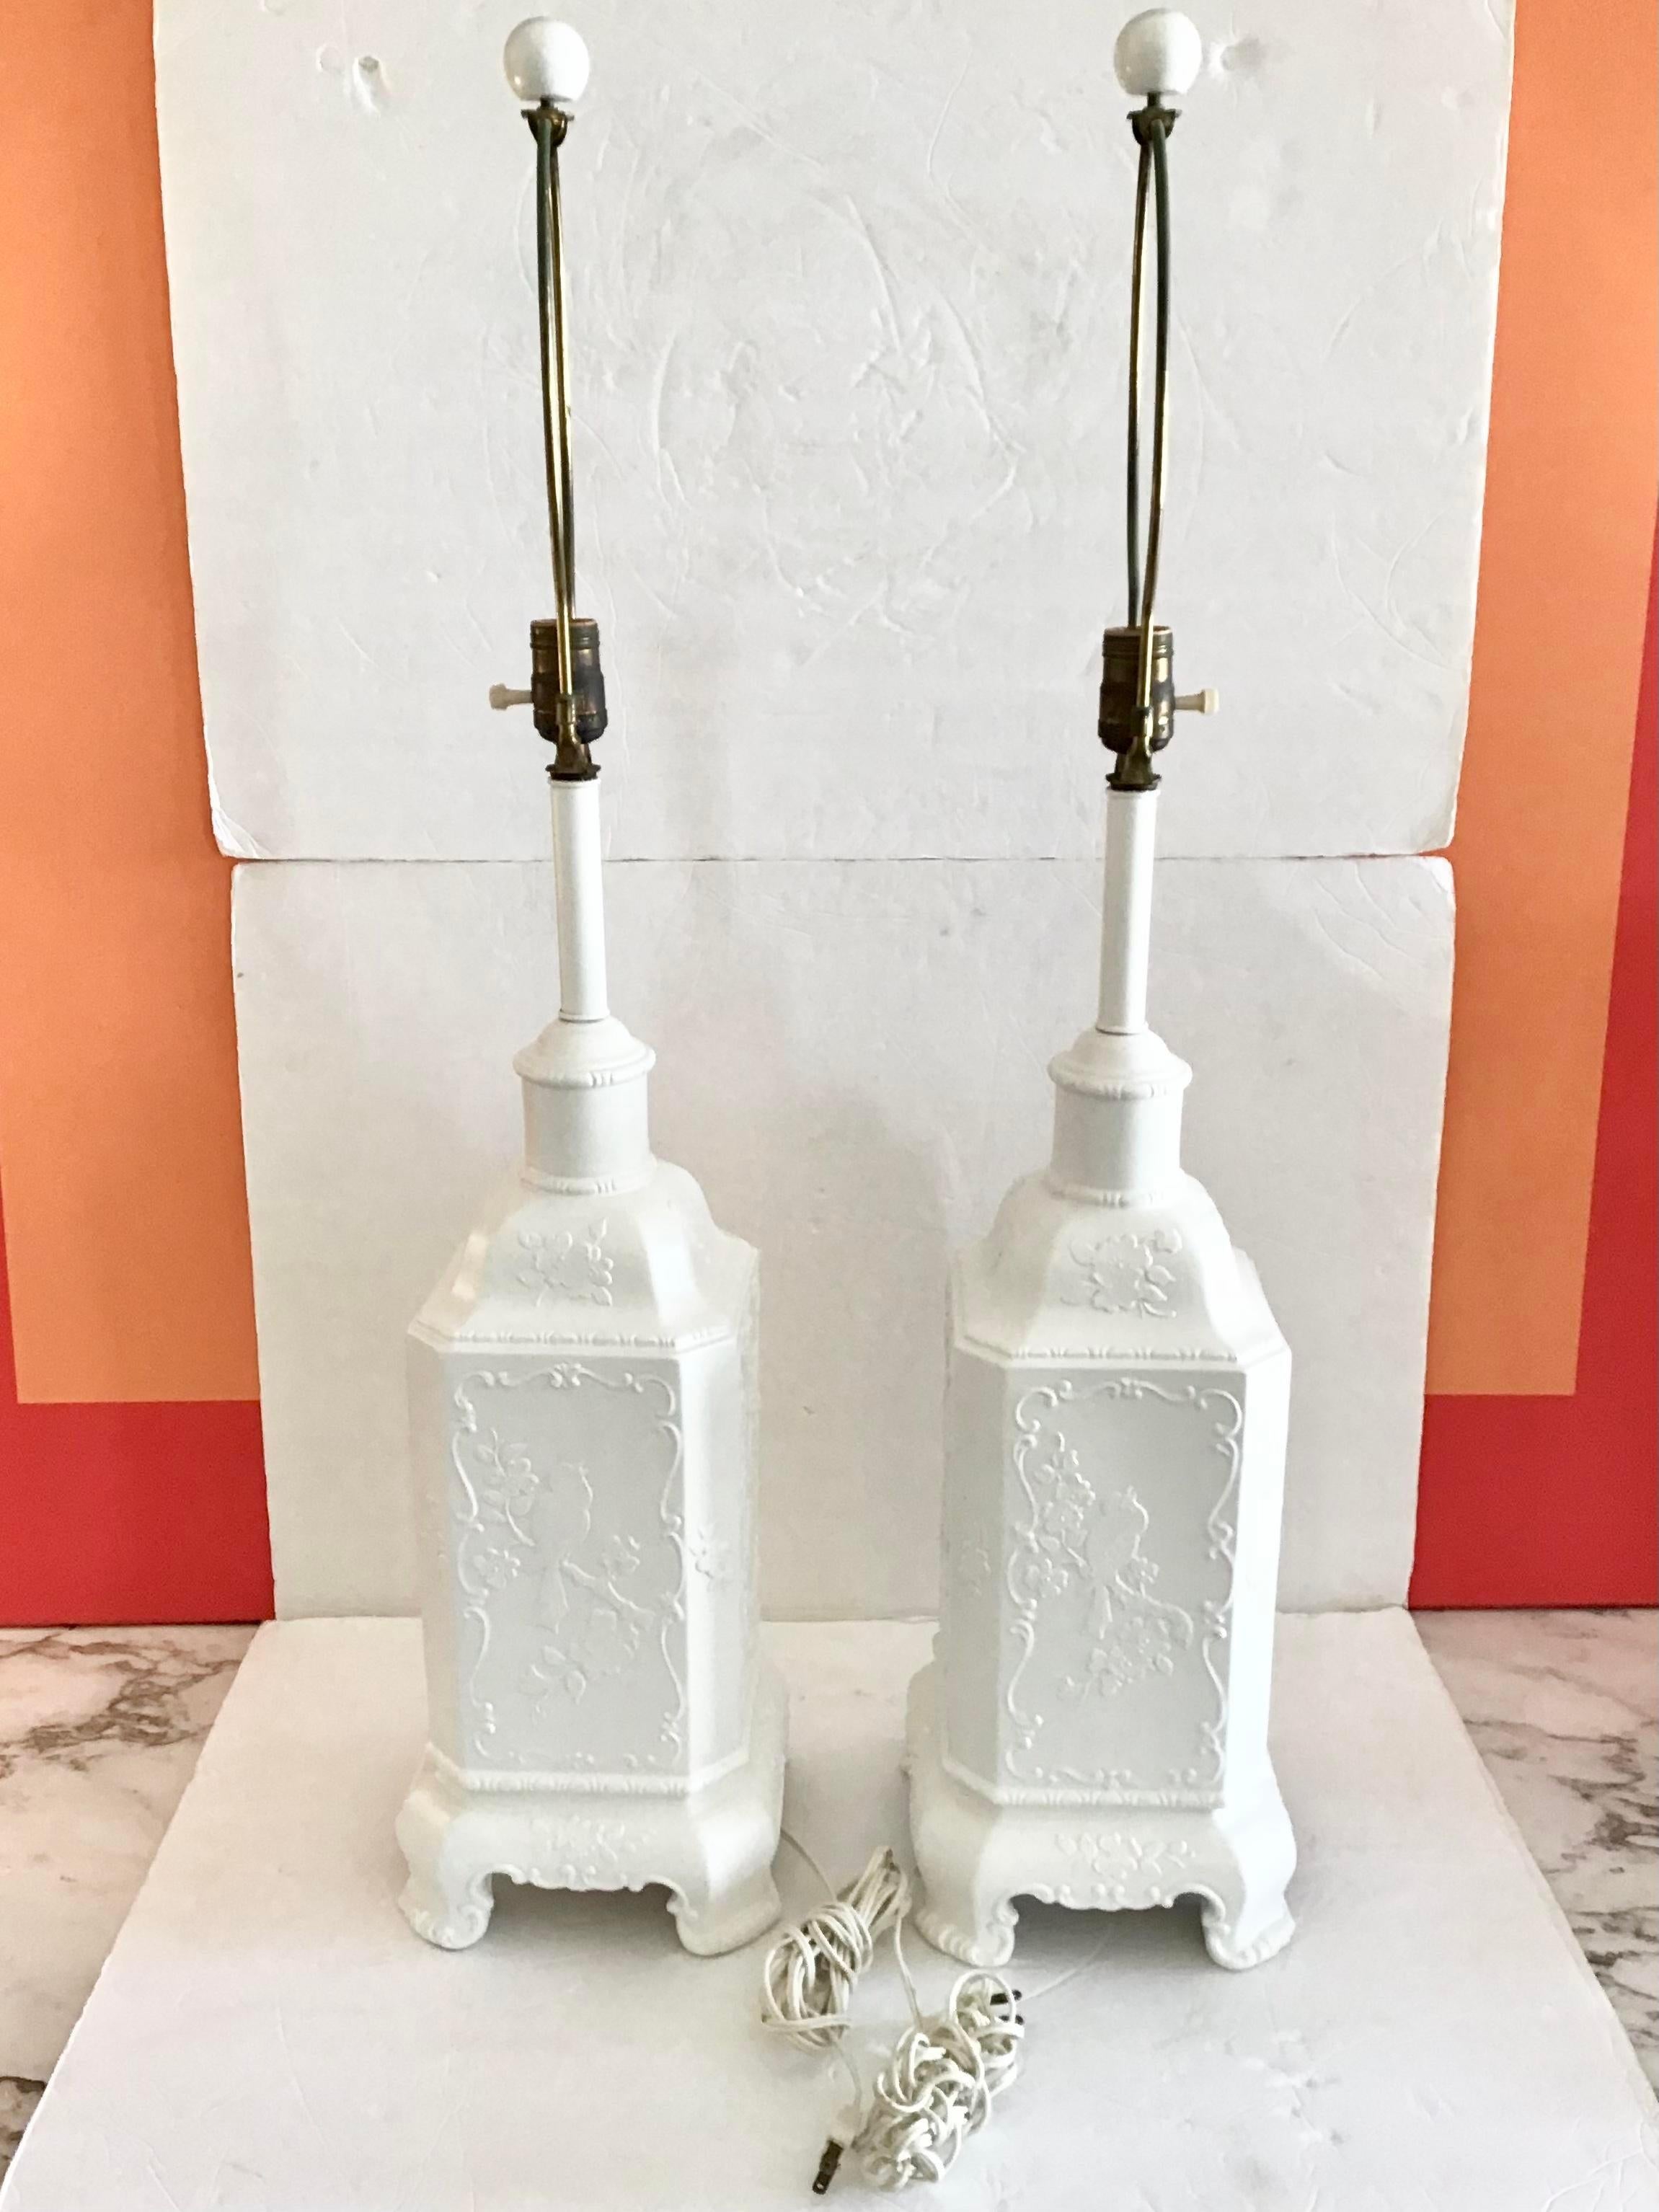 Modern chinoiserie Asian Ceramic Table Lamps Freshly Lacquered White, a Pair For Sale